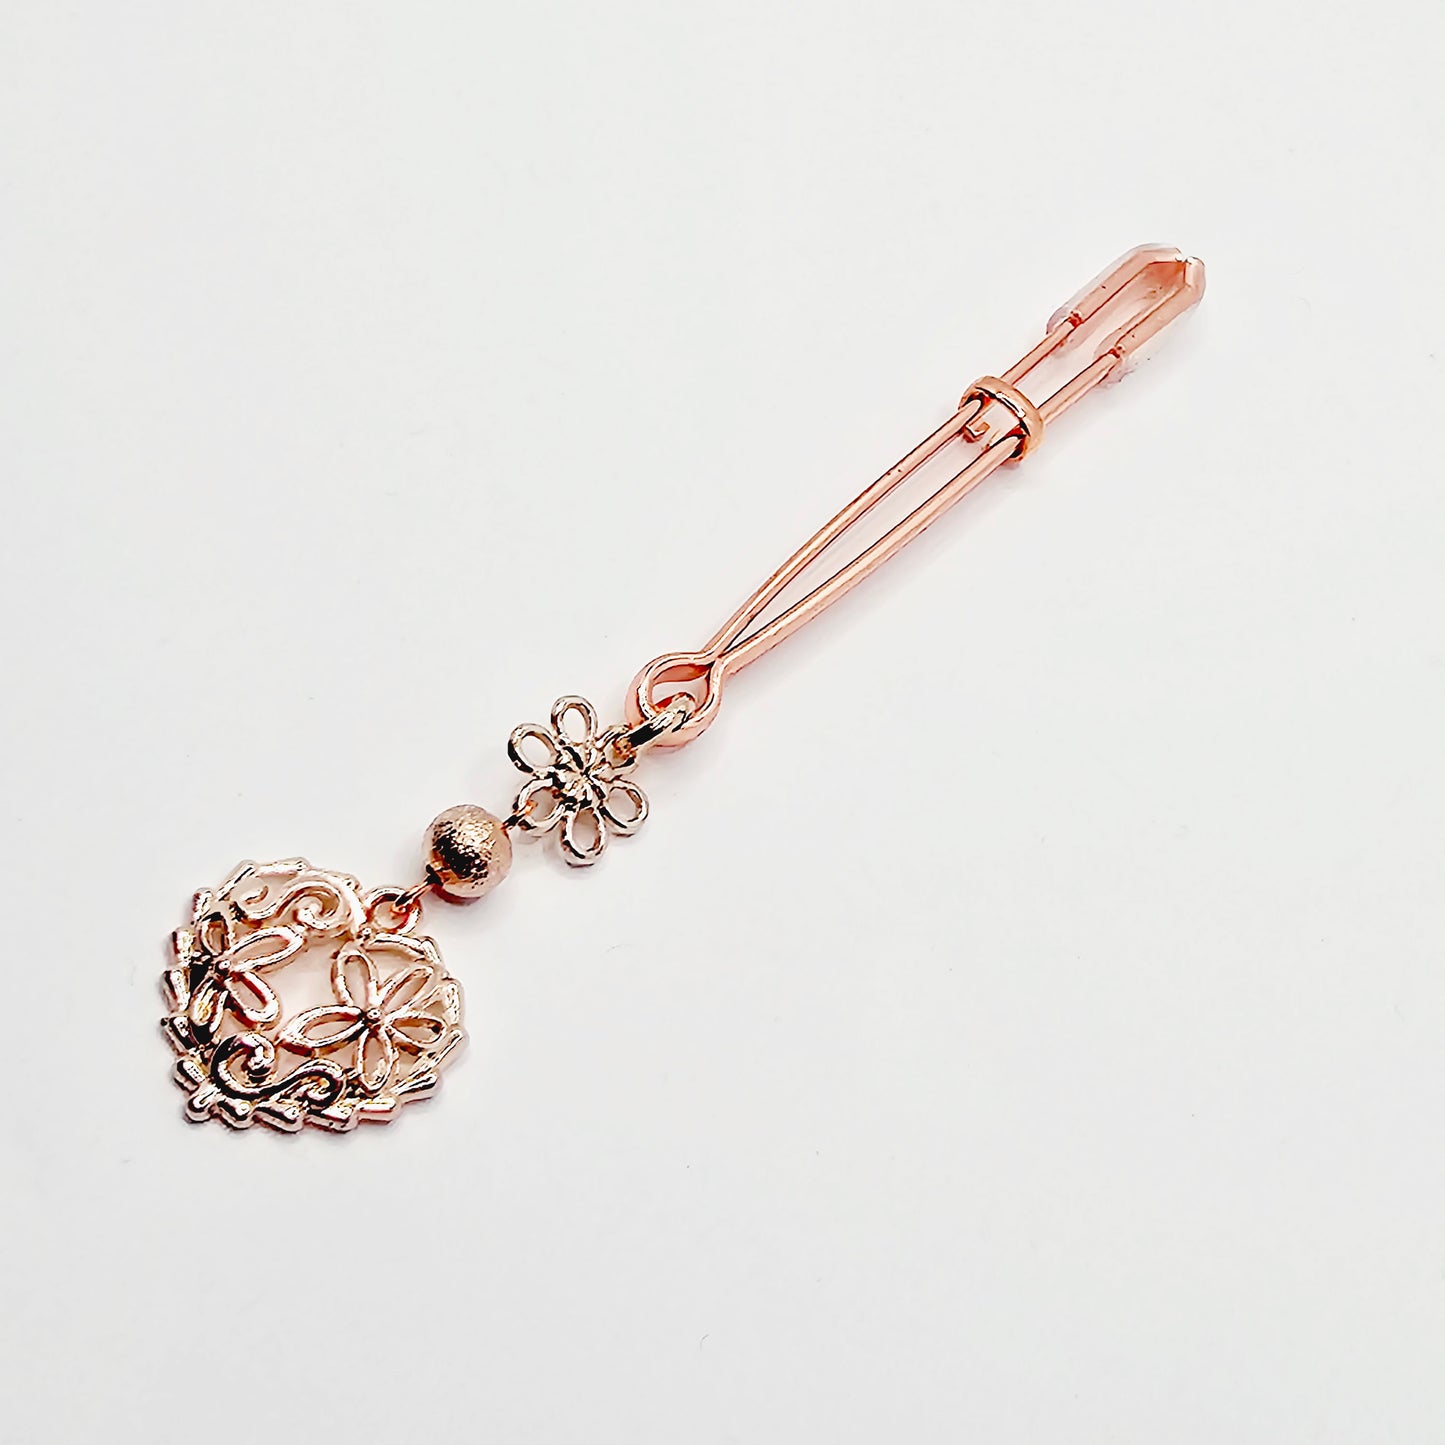 Rose Gold Clit Clamp. Tweezer Clitoral Clamp with Flowers and Heart